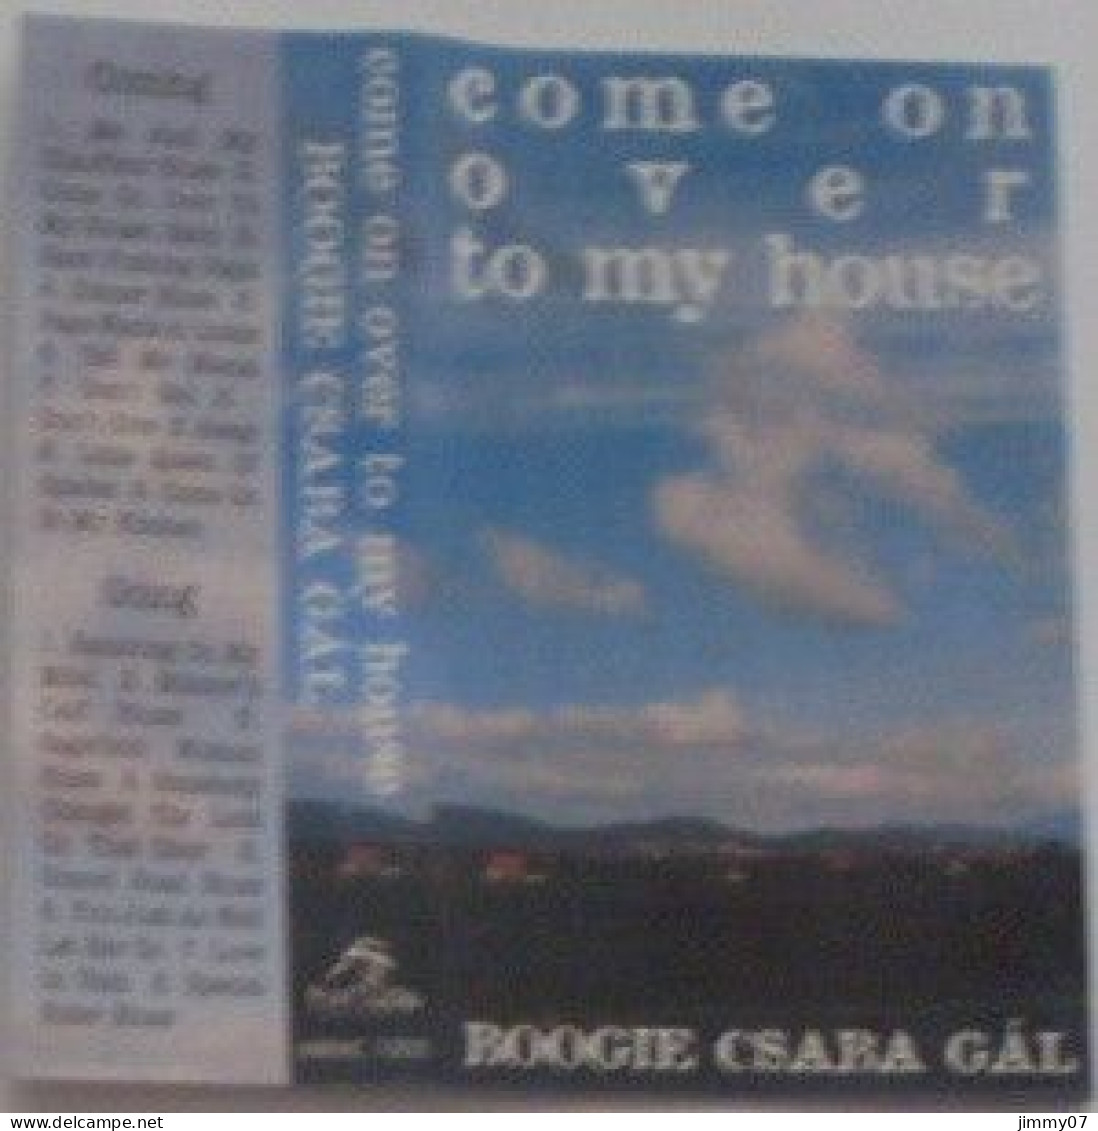 "Boogie" Csaba Gál - Come On Over To My House (Cass, Album) - Audio Tapes